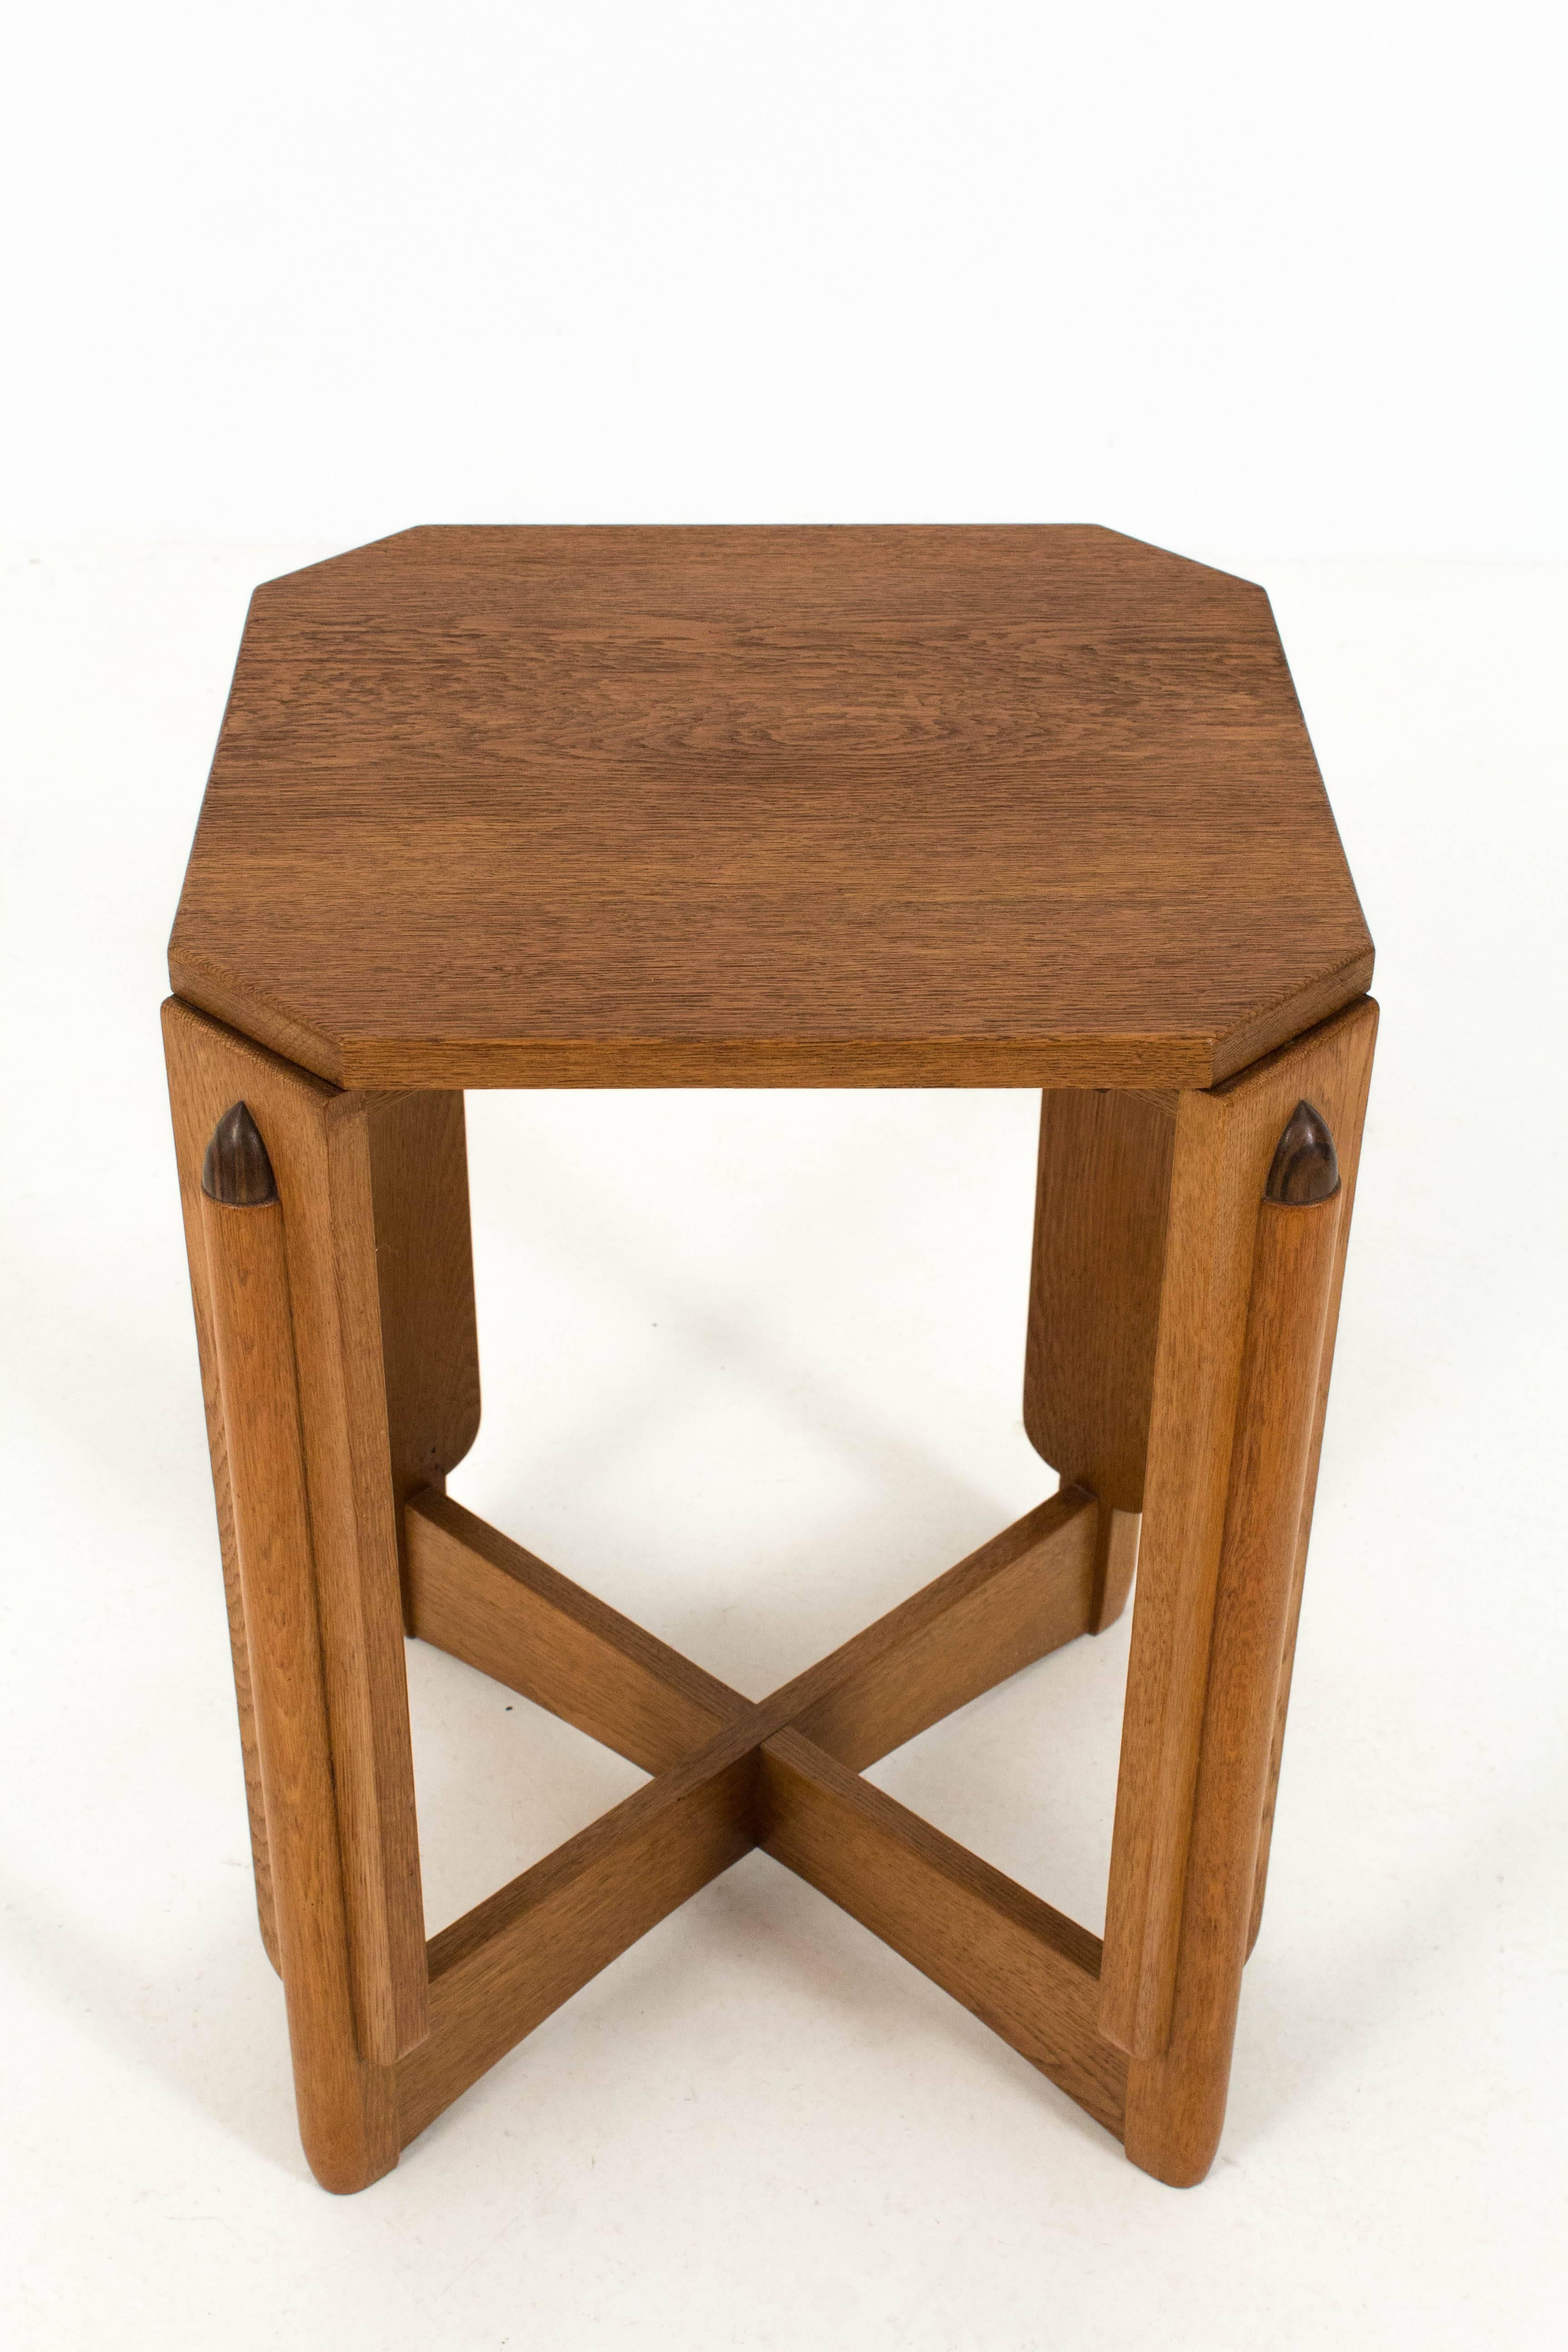 Early 20th Century Stylish and Rare Art Deco Amsterdam School Occasional Table by Hildo Krop